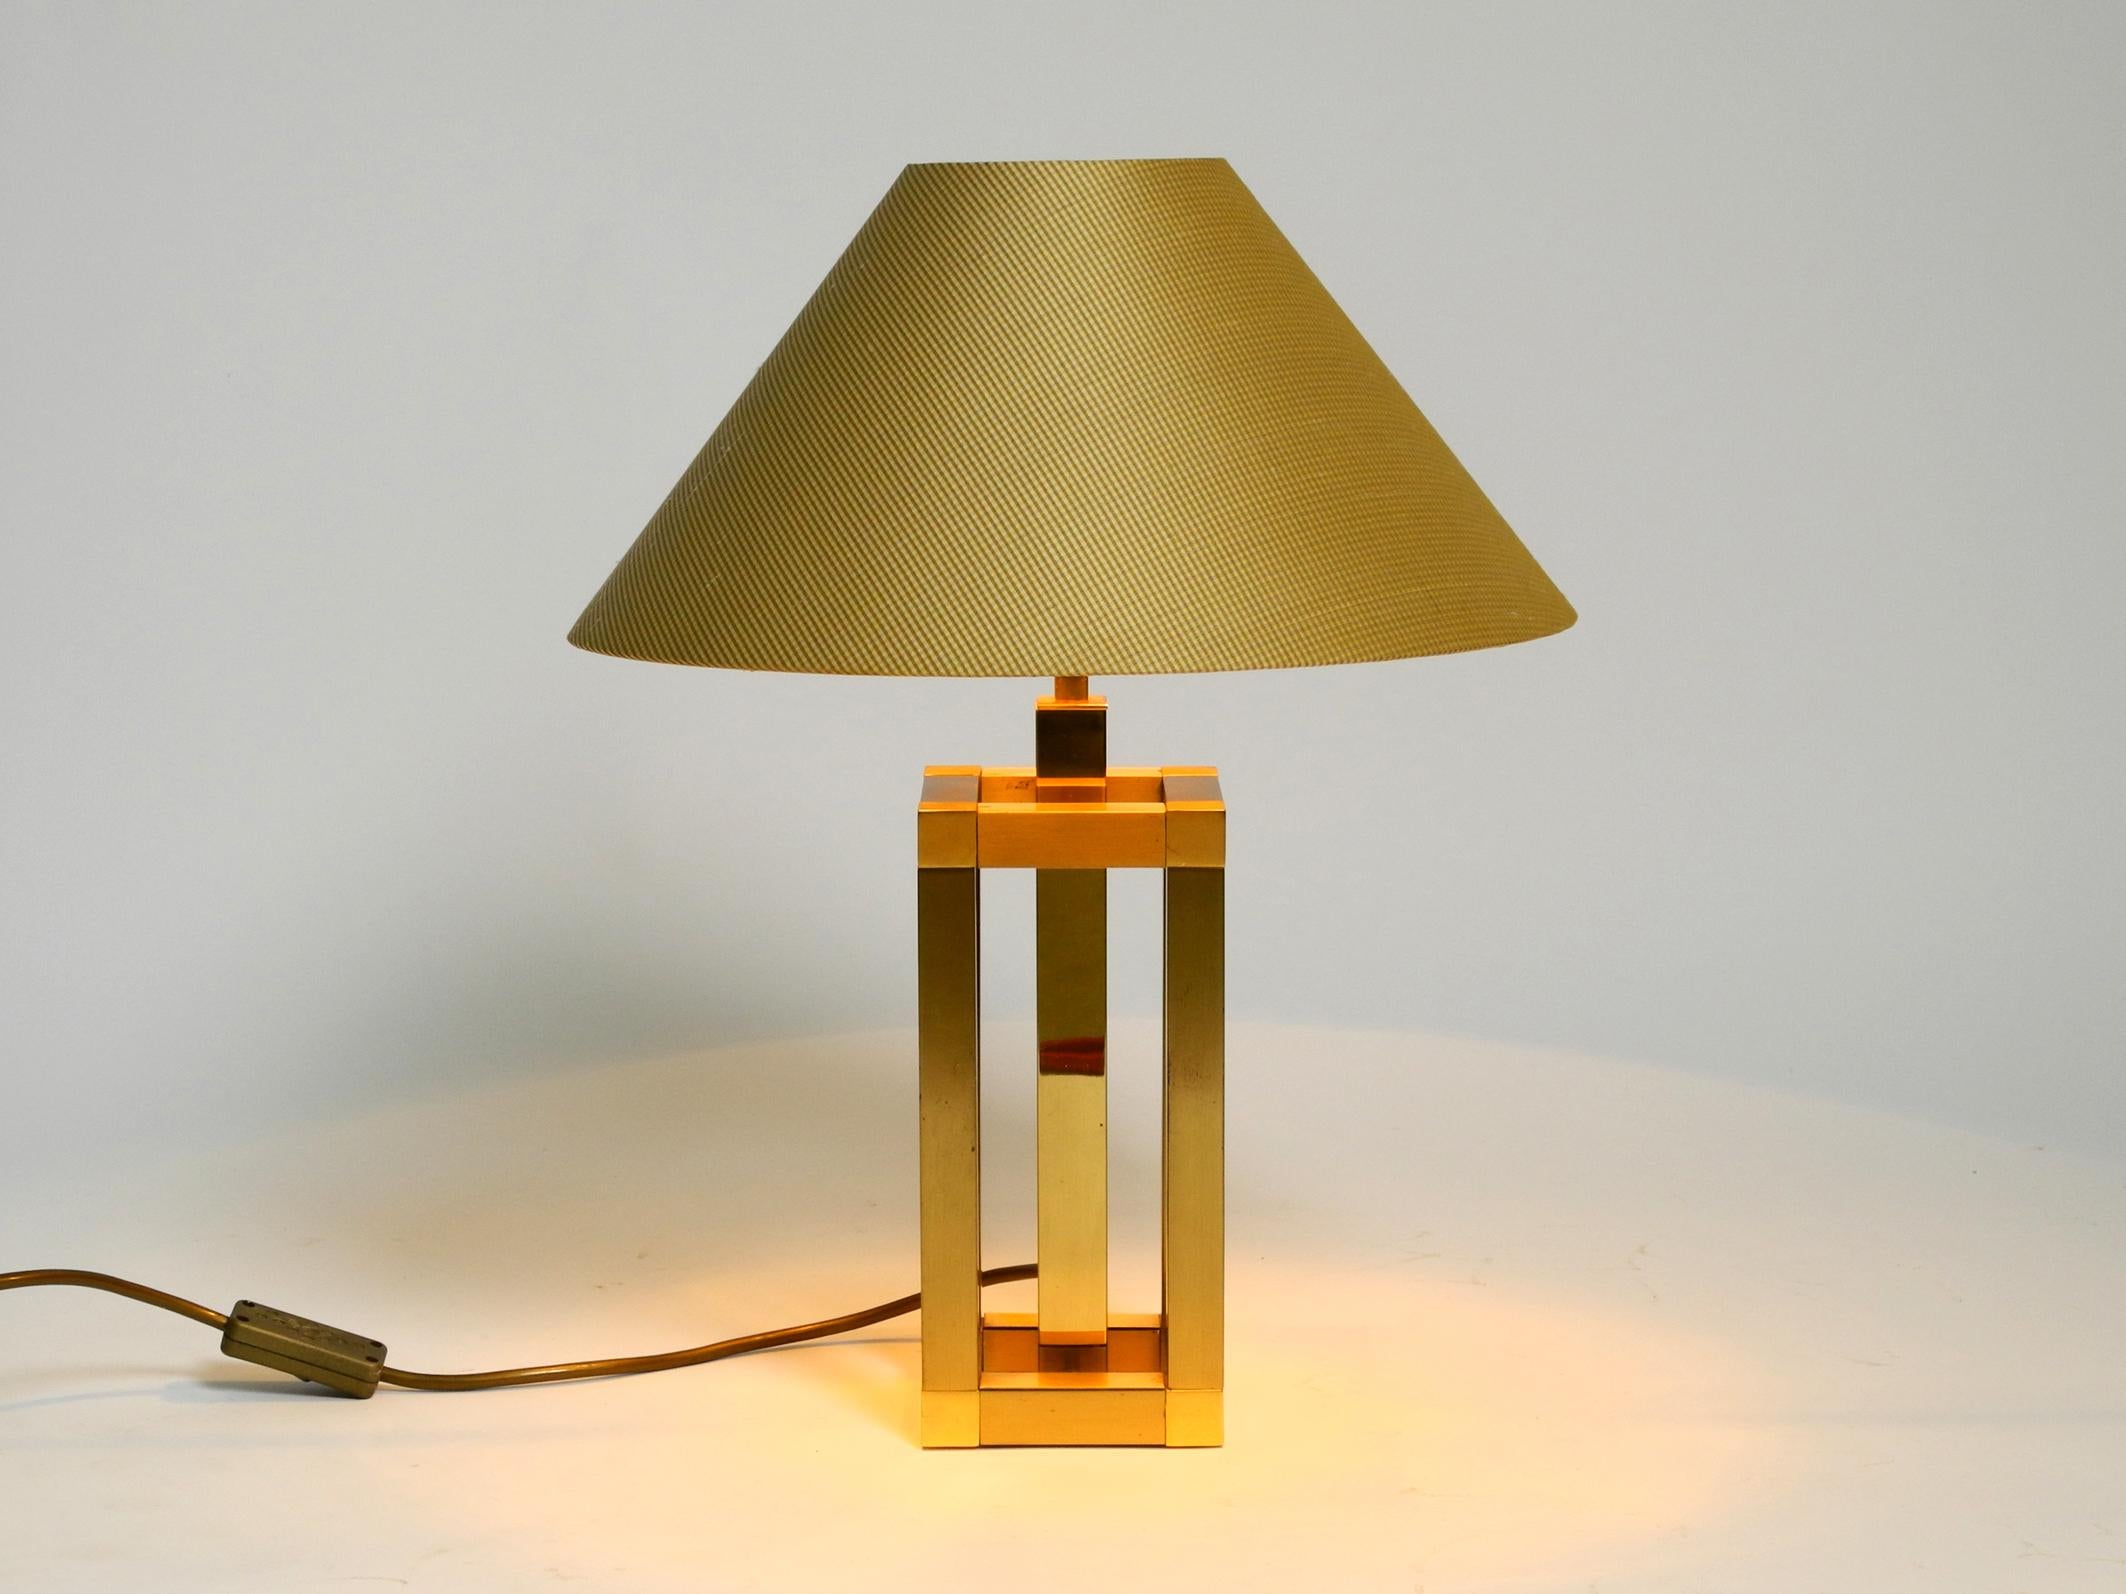 Beautiful 1970s Regency design brass table lamp. Made in Italy.
Lamp made entirely of brass.
Great Hollywood Regency design in very good vintage condition. Very few signs of use
The high-quality fabric shade is golden inside.
There are a few fabric